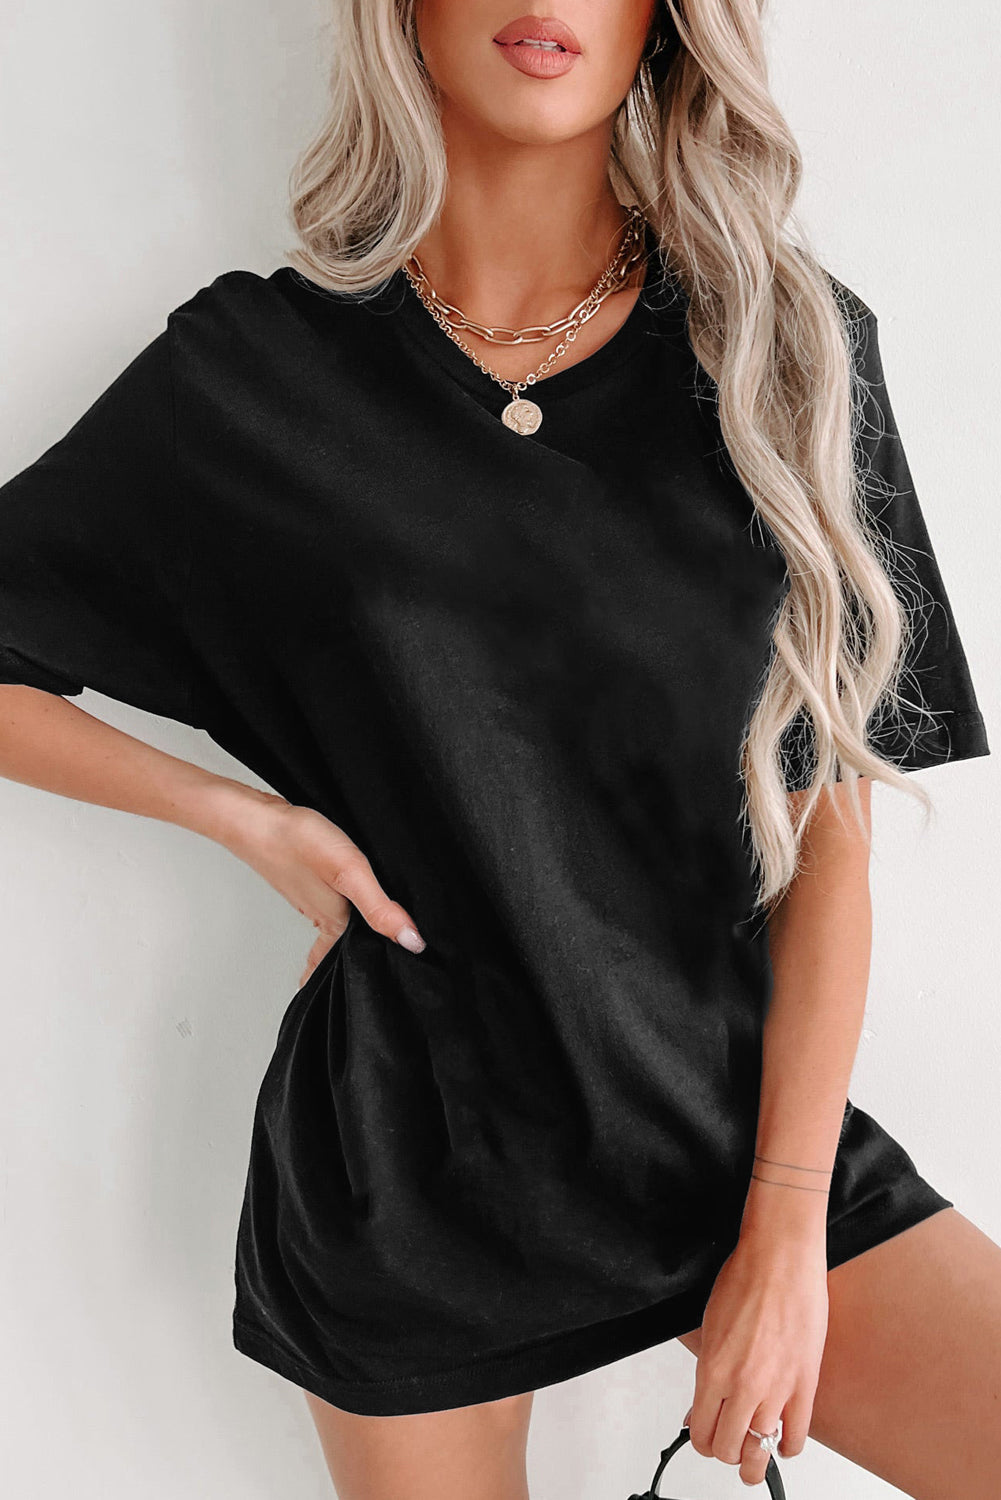 Black Solid Color Round Neck Basic Tunic T Shirt